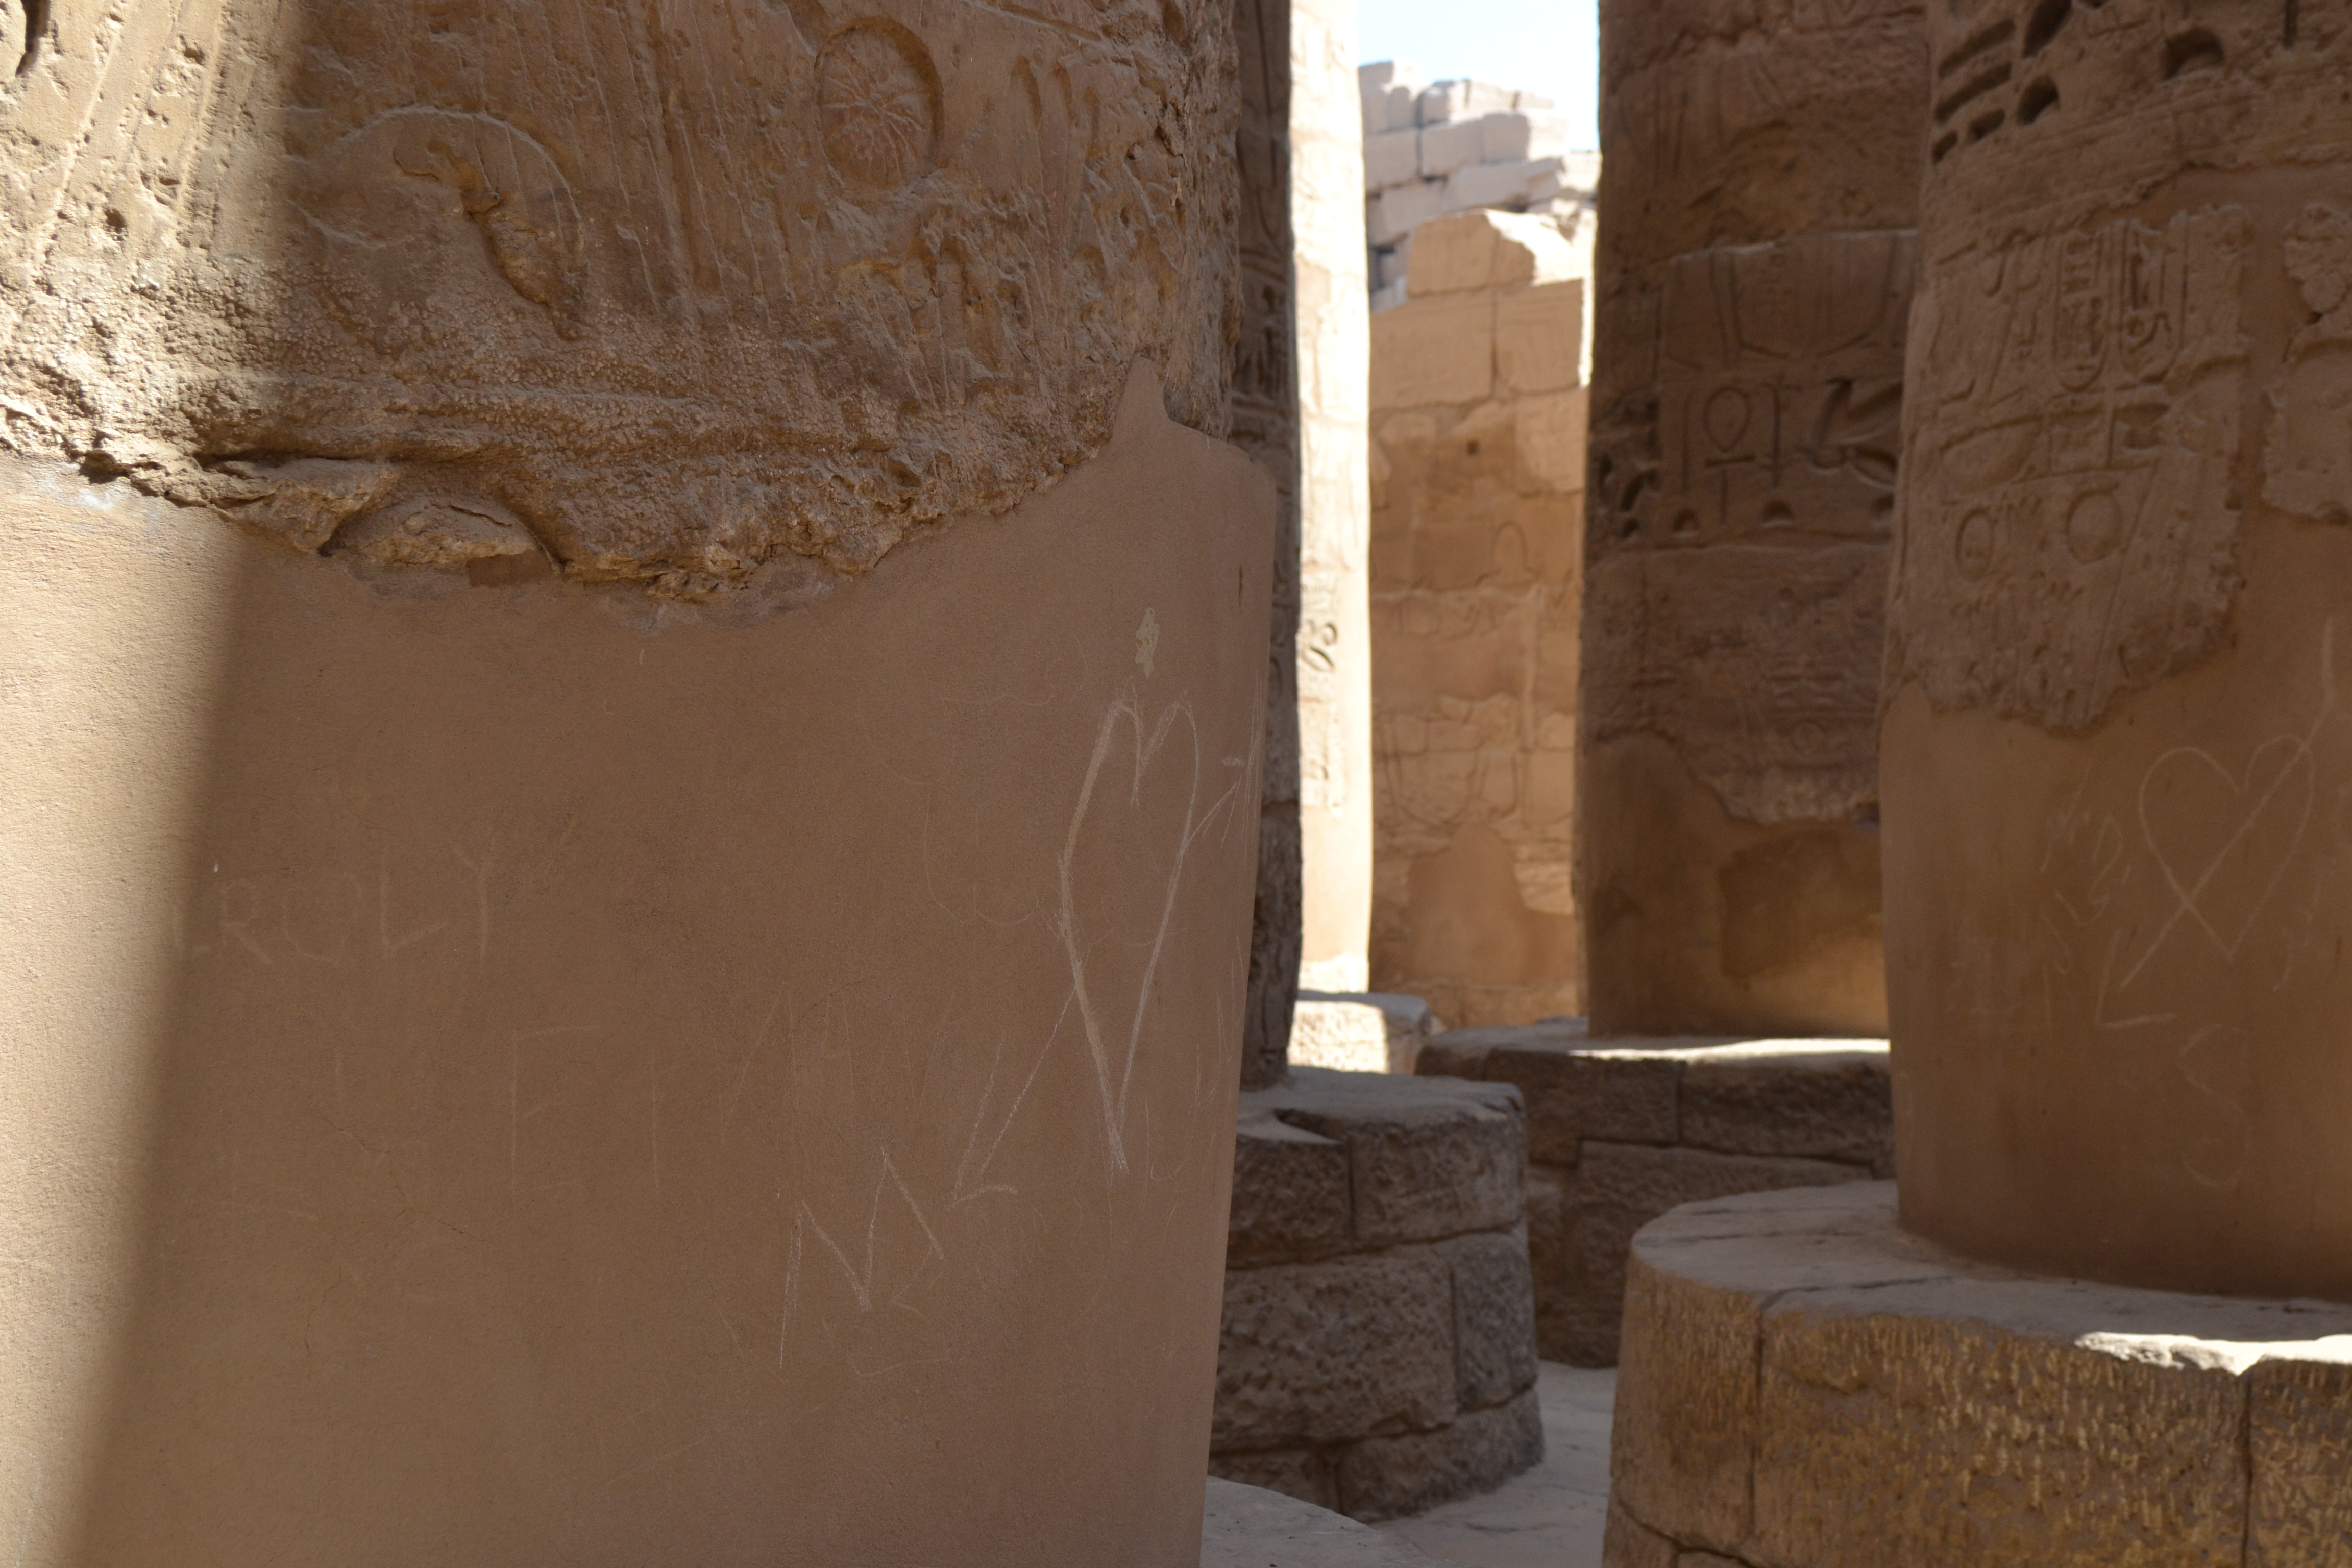 Love hearts and more petty graffiti plagues the ancient columns.